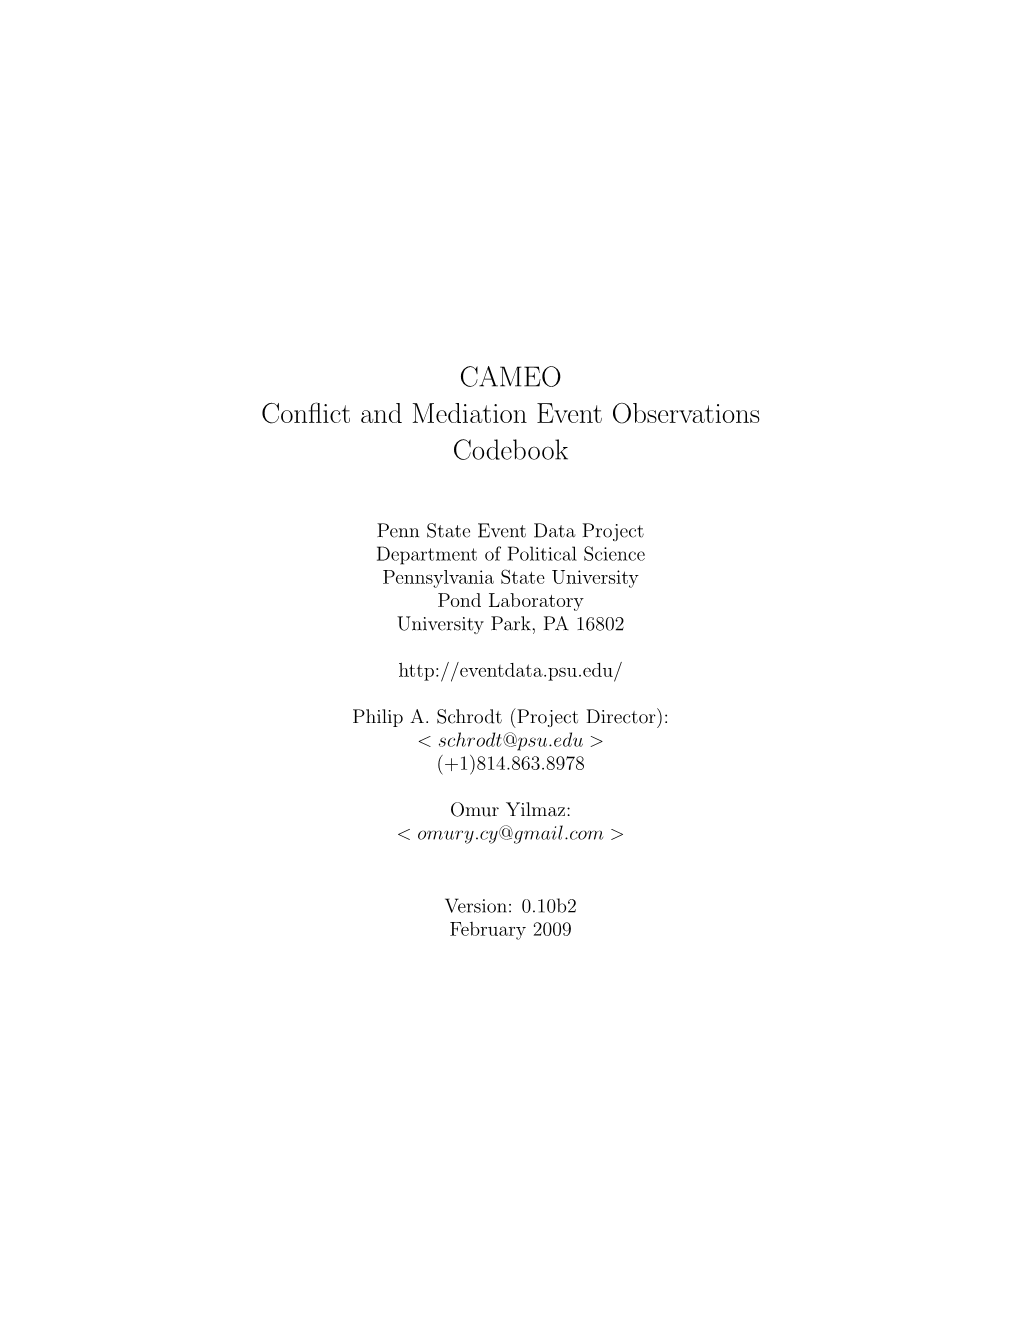 CAMEO Conflict and Mediation Event Observations Codebook